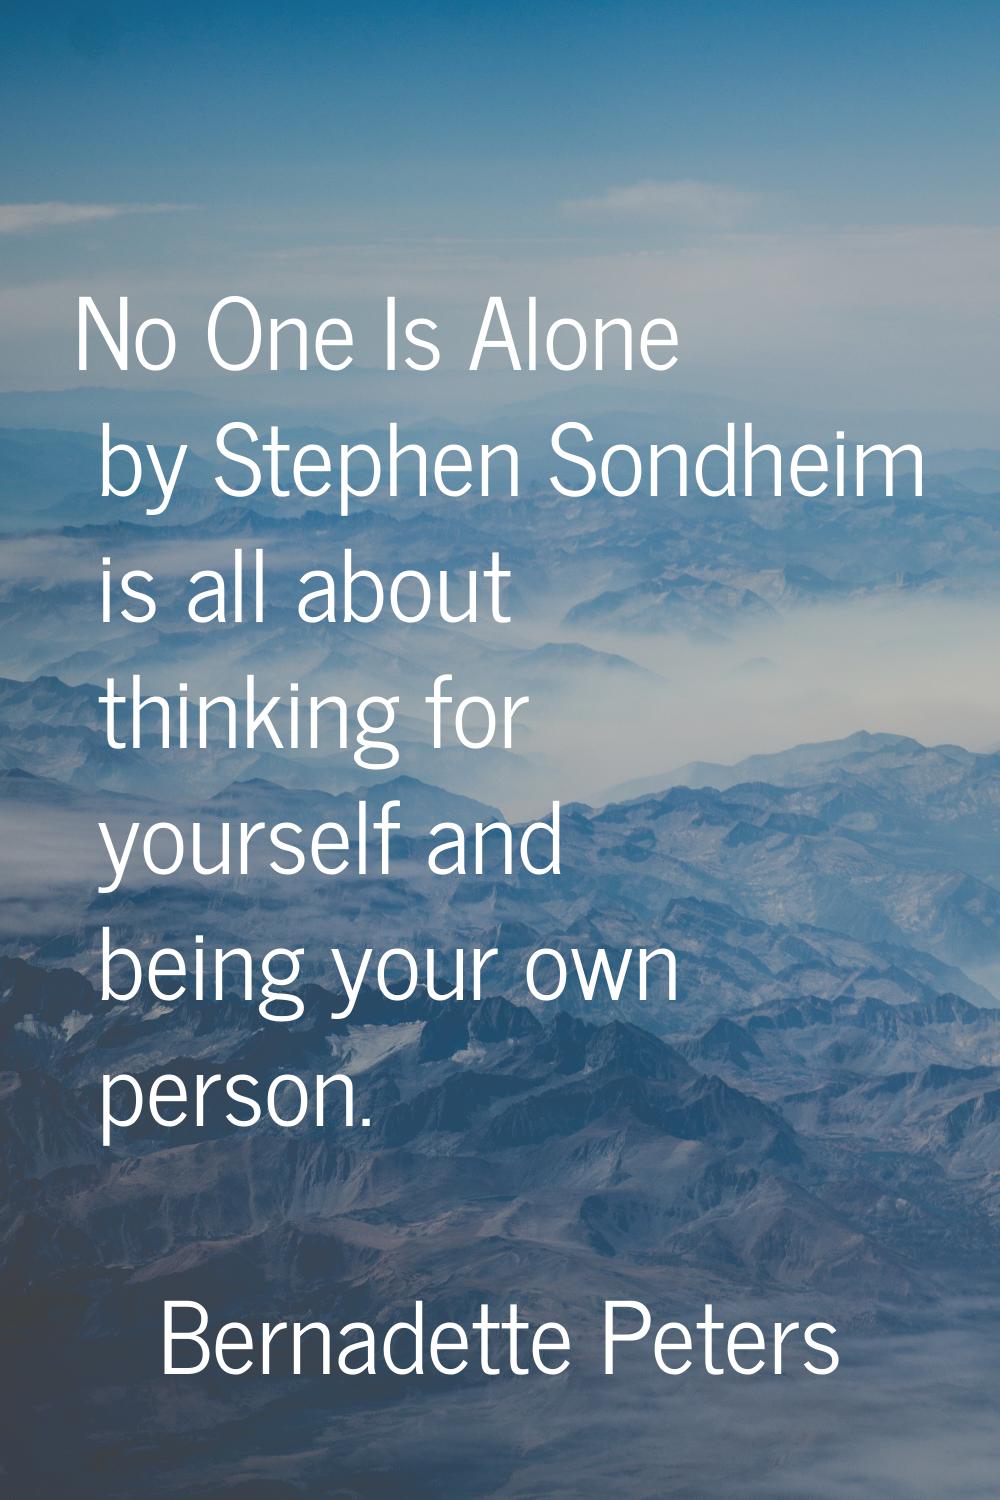 No One Is Alone by Stephen Sondheim is all about thinking for yourself and being your own person.